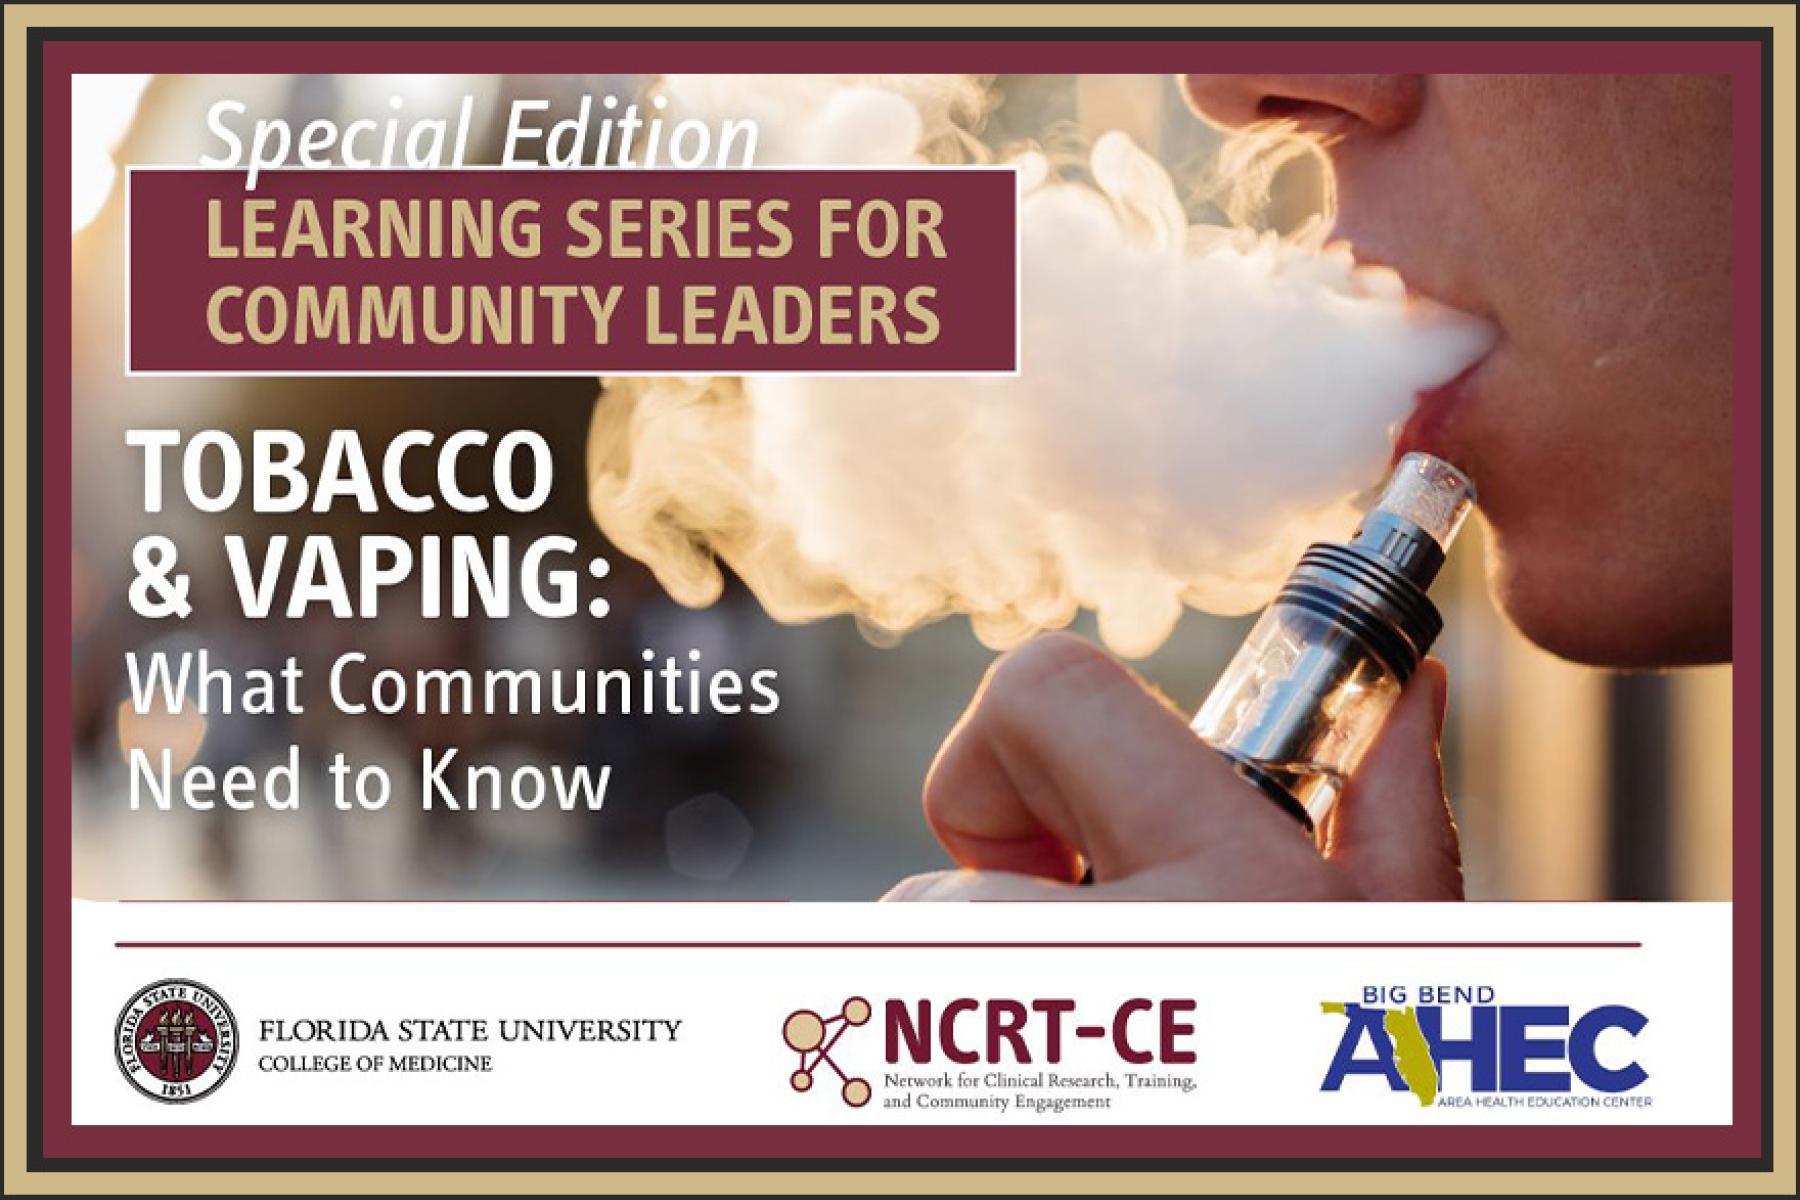 Tobacco & Vaping: What Communities Need to Know